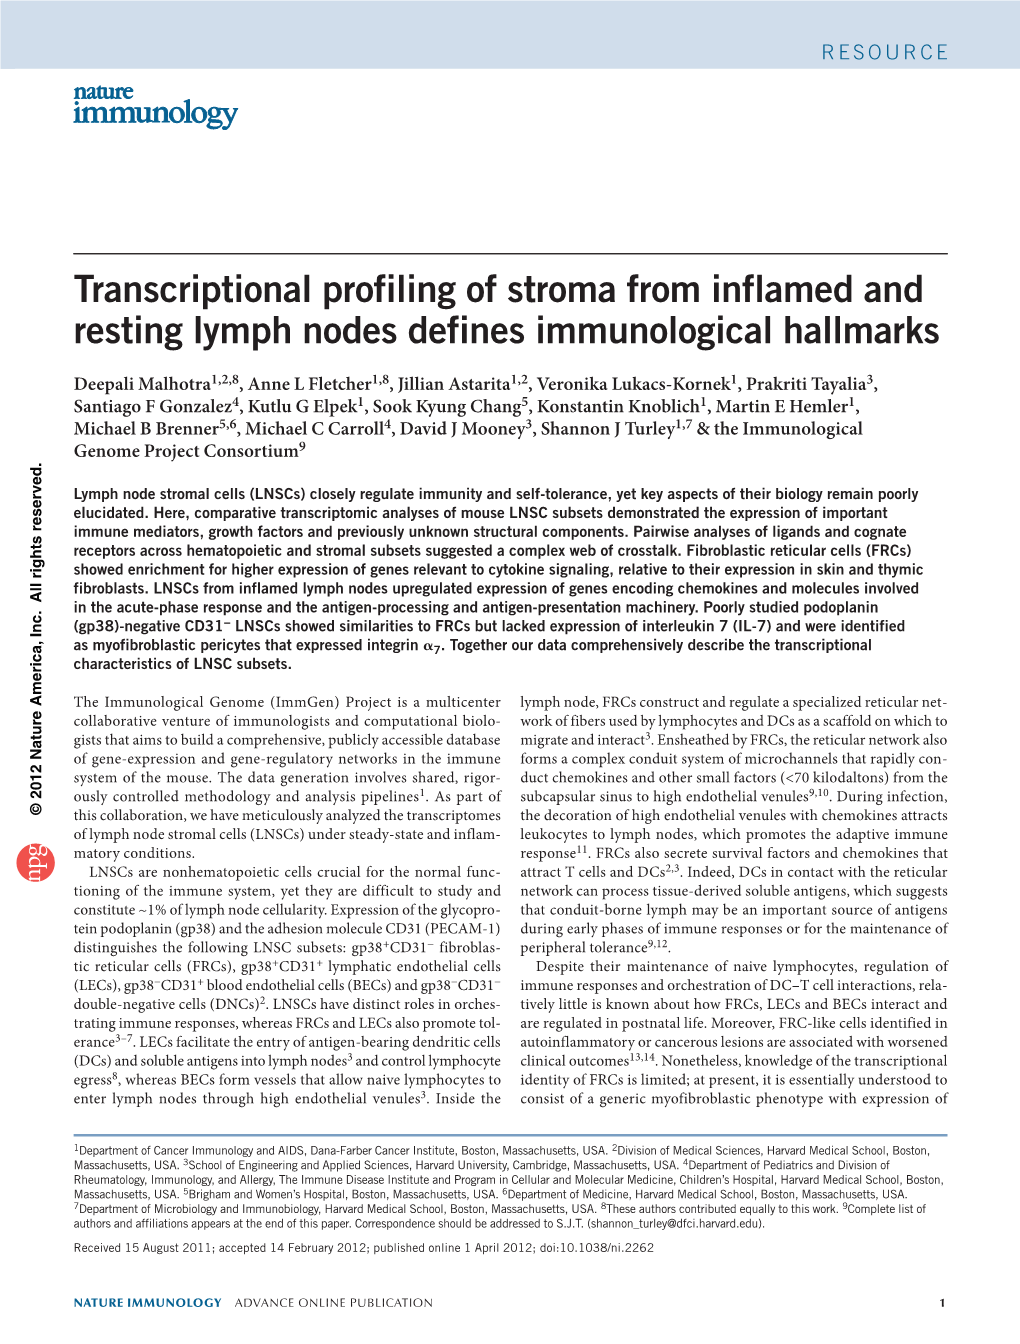 Transcriptional Profiling of Stroma from Inflamed and Resting Lymph Nodes